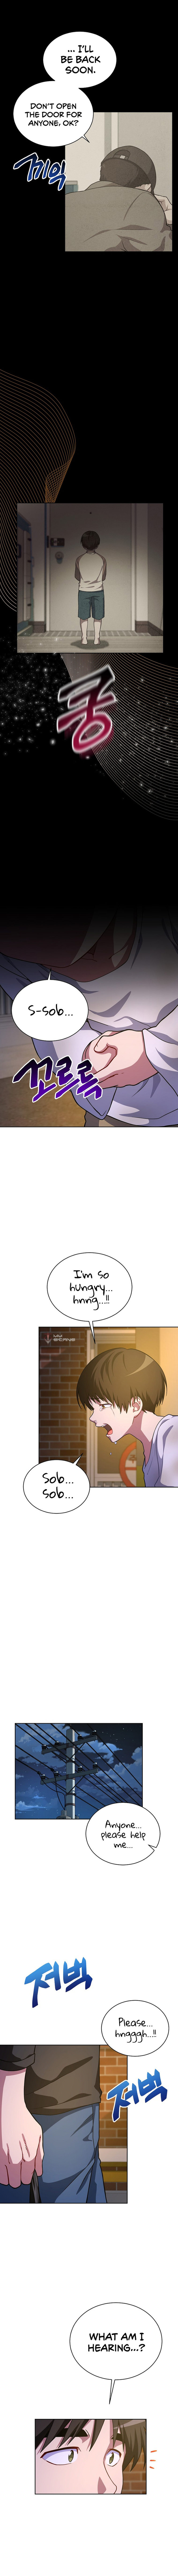 Please have a meal - Chapter 51 Page 4